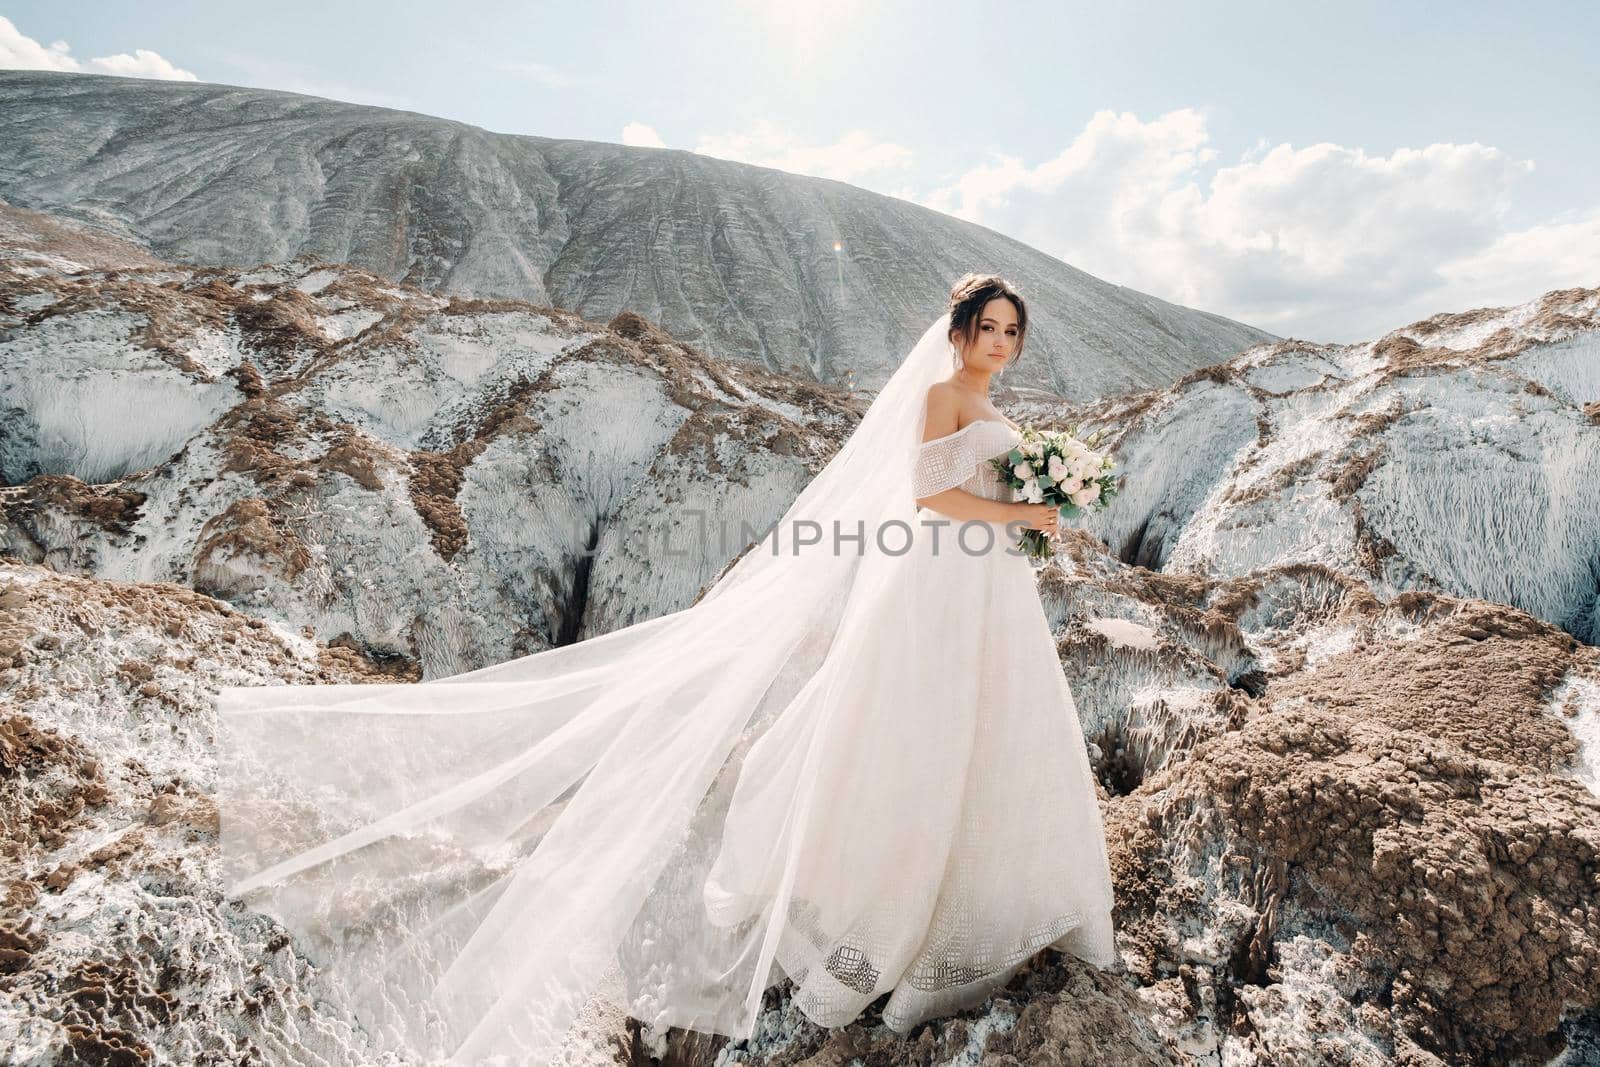 Beautiful bride in a wedding dress with a bouquet on the top of the salt mountains. A stunning young bride with curly hair . Wedding day. . Beautiful portrait of the bride without the groom